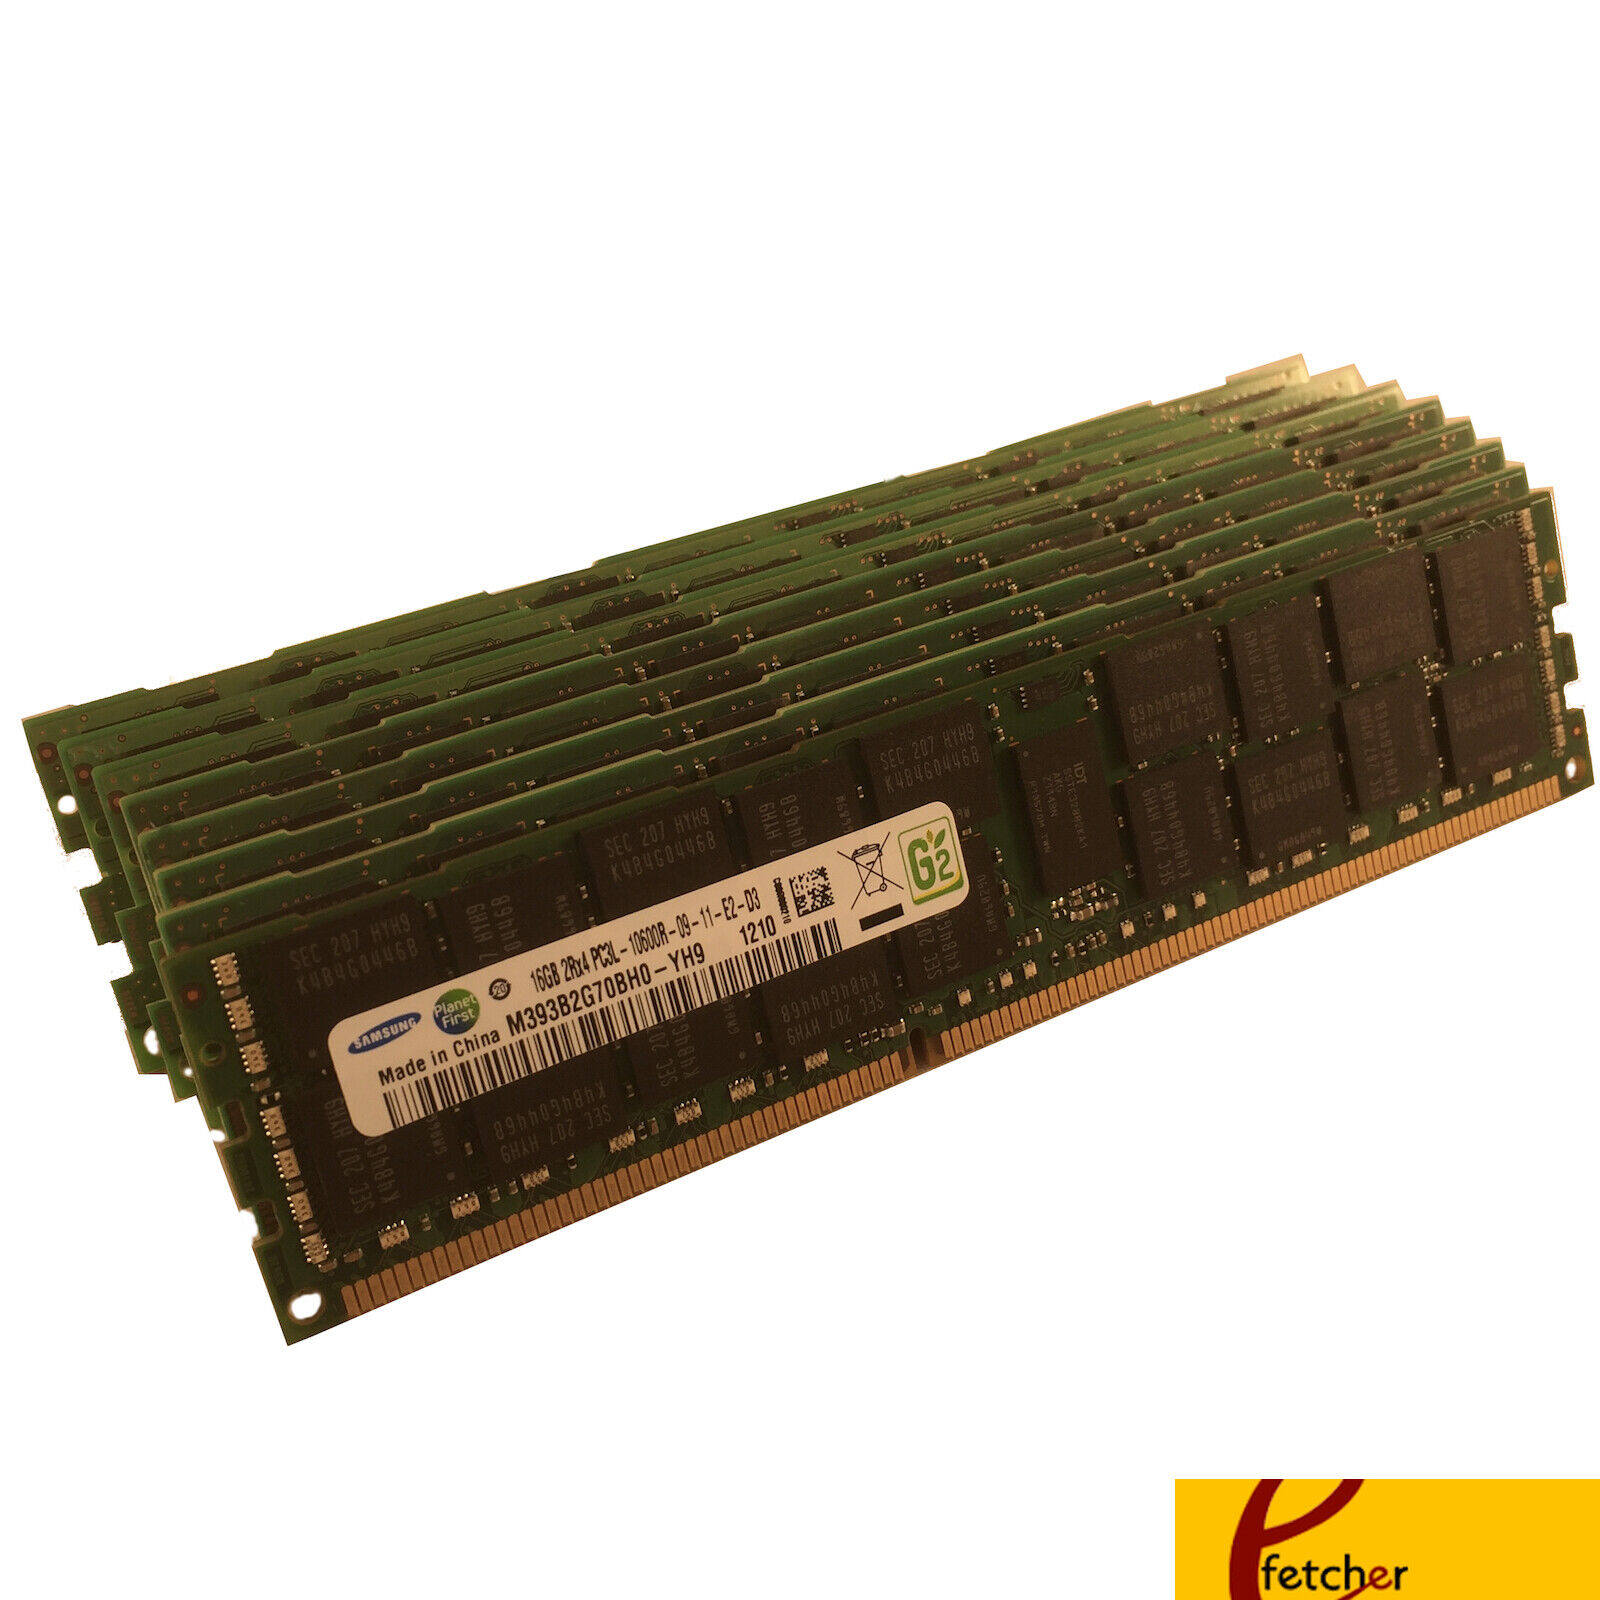 128GB (8 X 16GB) DDR3 Memory For Apple Mac Pro 2012 5,1 12 Cores 3.06GHz 